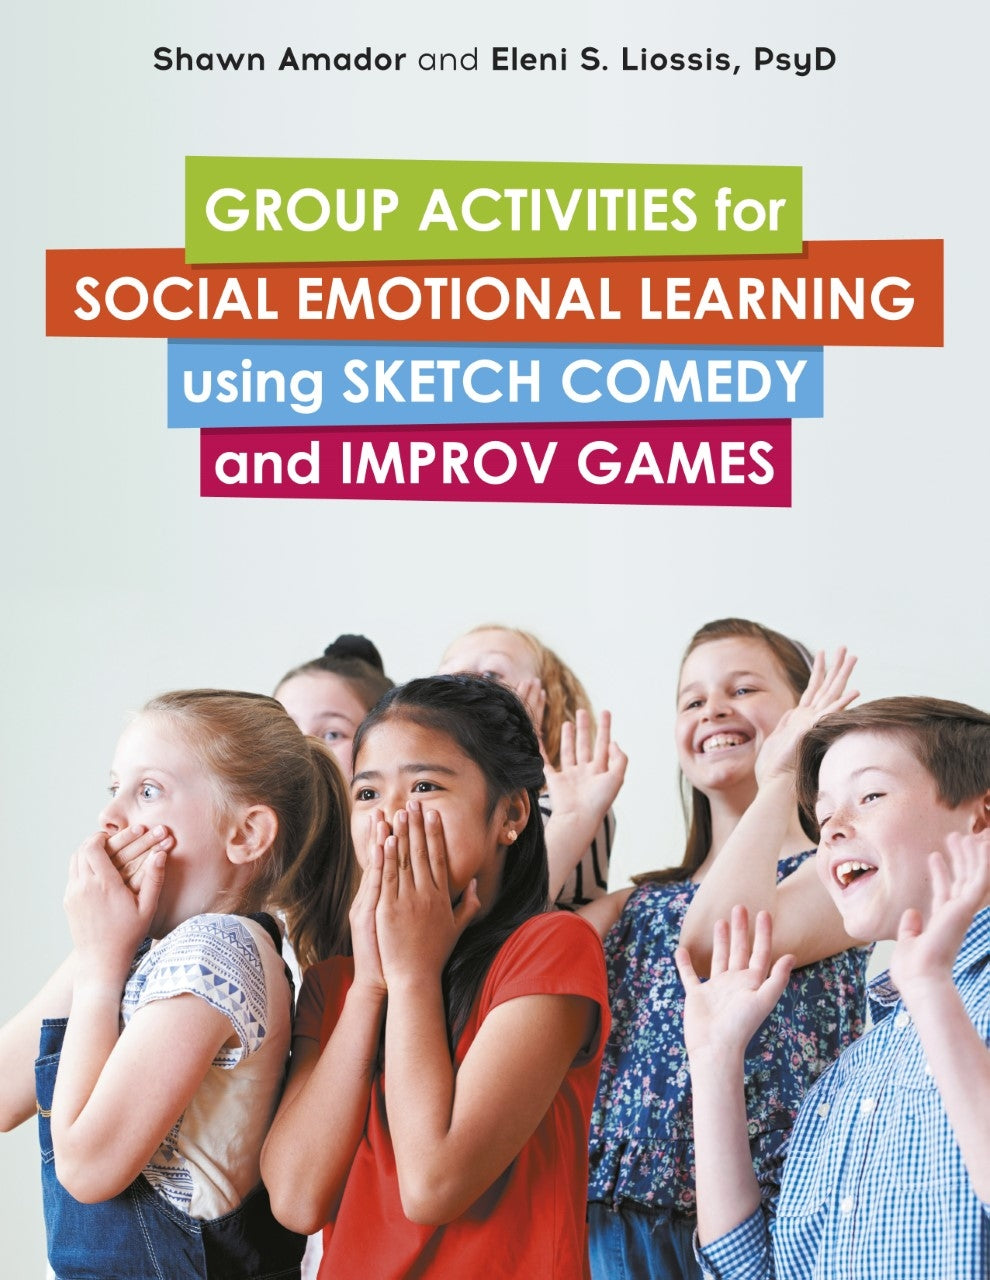 Group Activities for Social Emotional Learning using Sketch Comedy and Improv Games by Shawn Amador, Eleni Liossis